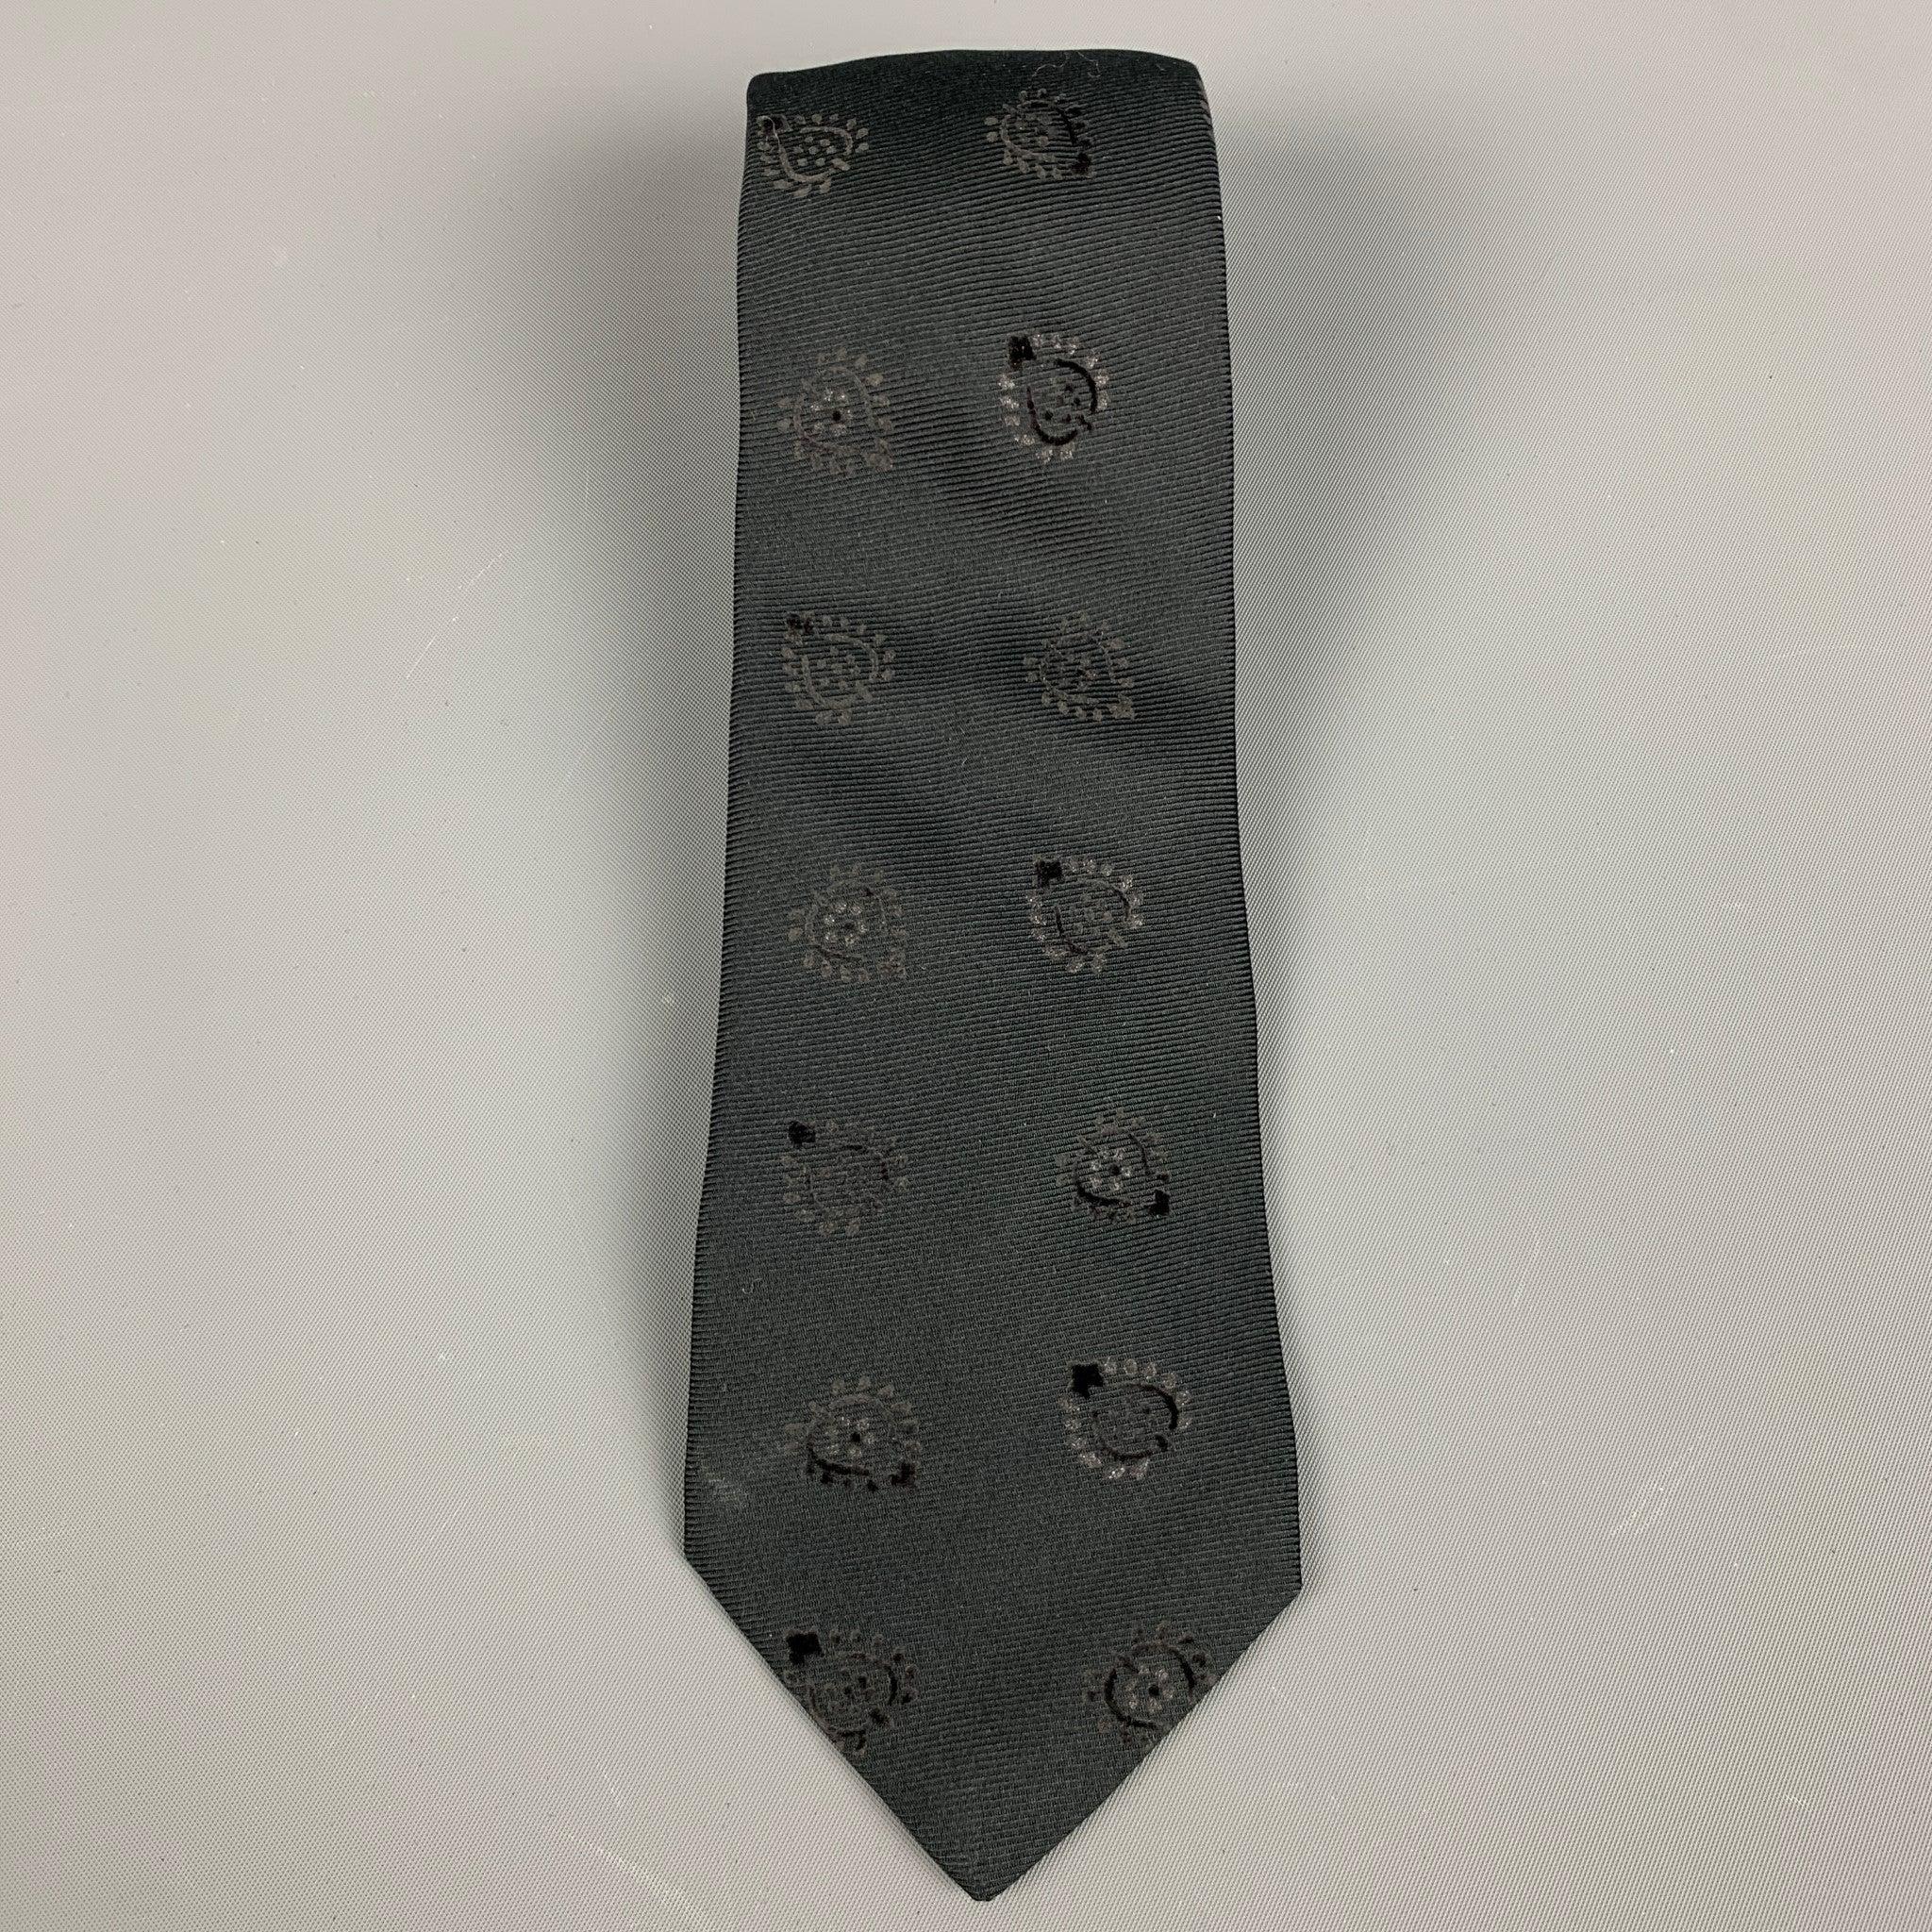 ETRO
necktie in a
black silk blend jacquard featuring abstract florals pattern. Made in Italy.Very Good Pre-Owned Condition. Minor mark. 

Measurements: 
  Width: 3 inches Length: 62 inches 
  
  
 
Reference: 127993
Category: Tie
More Details
   